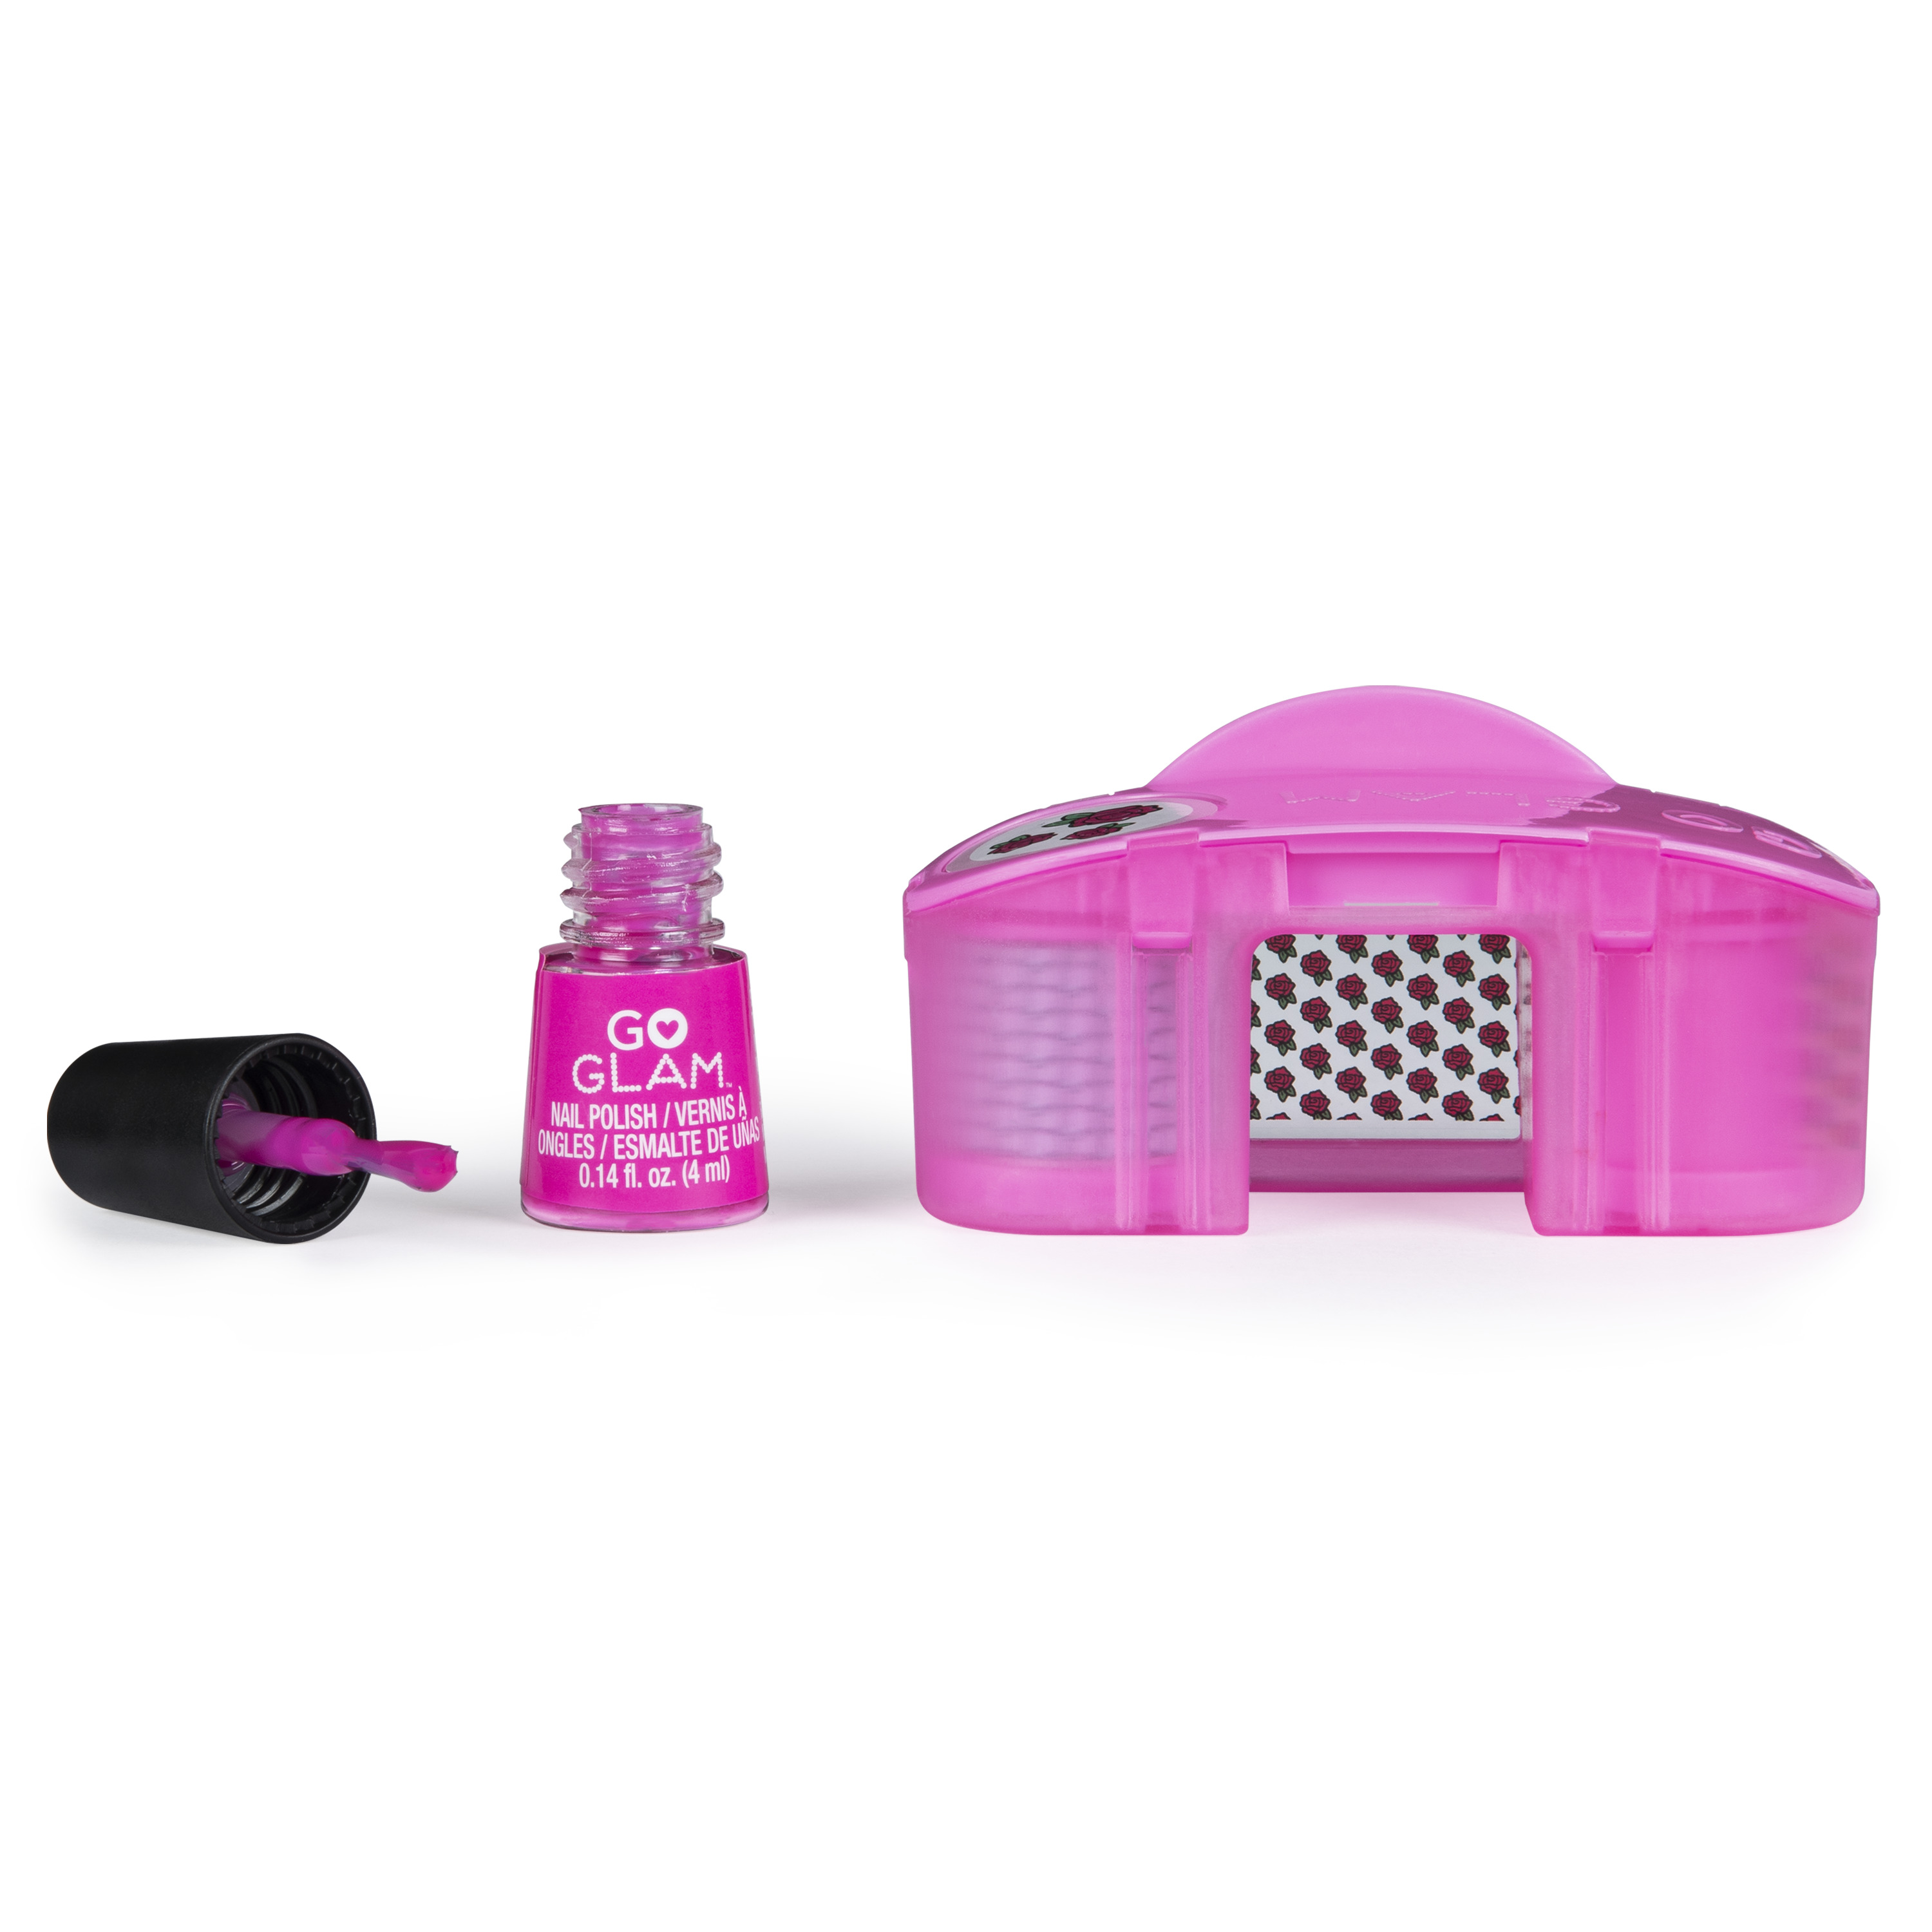 Go Glam Nail Stamper : Large Refill